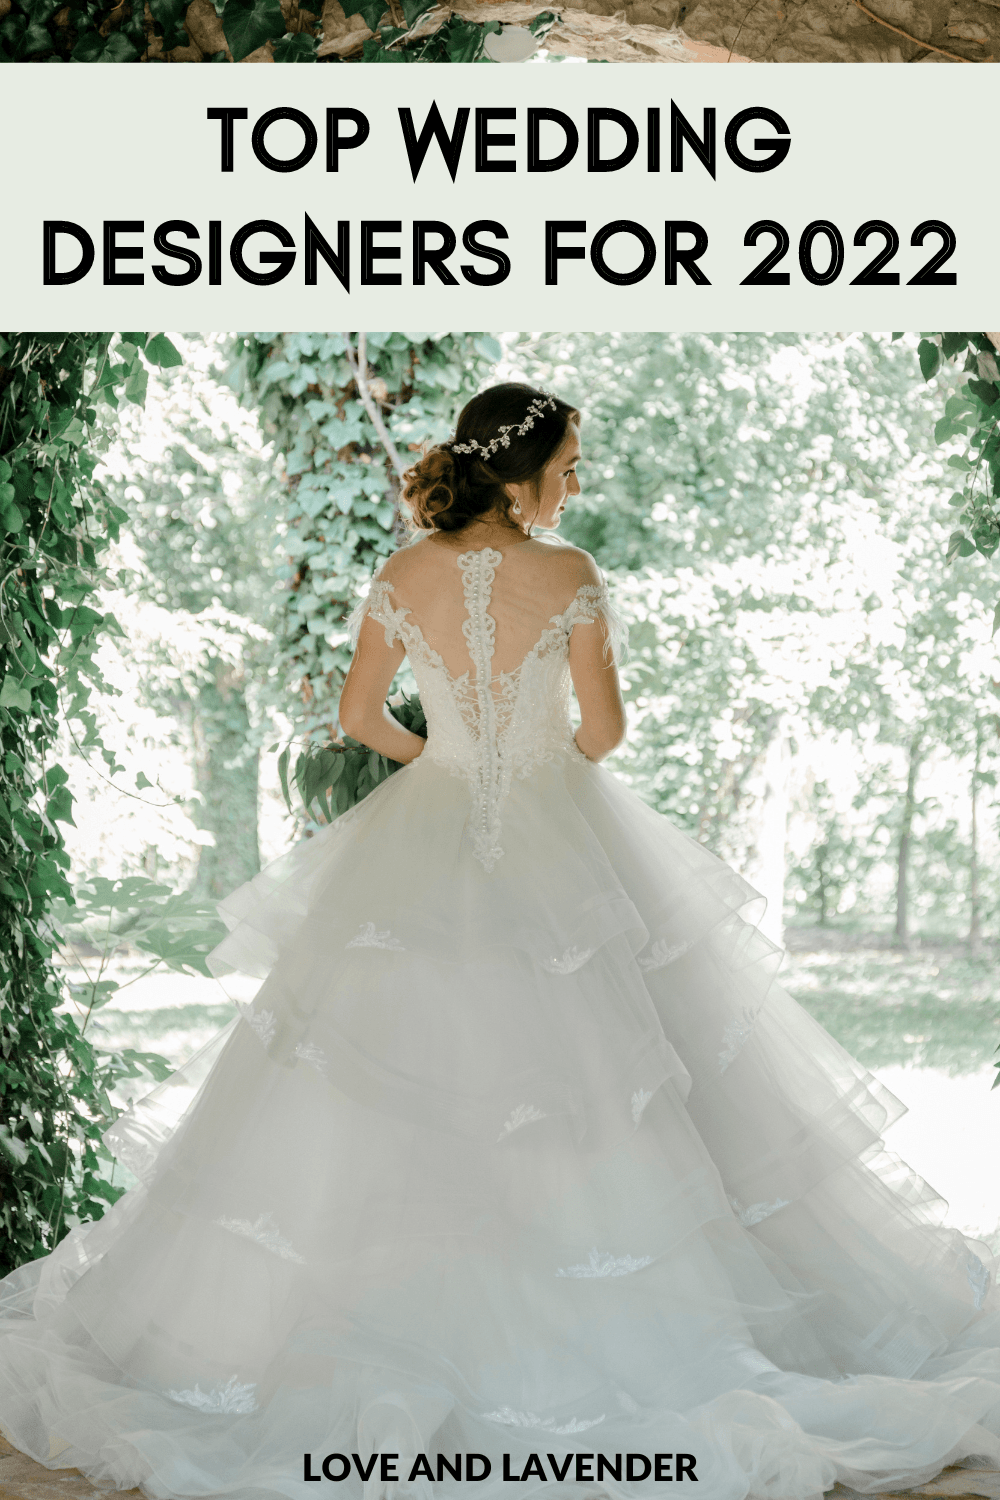 The Ultimate List of Wedding Gown Designers [2023 Edition]